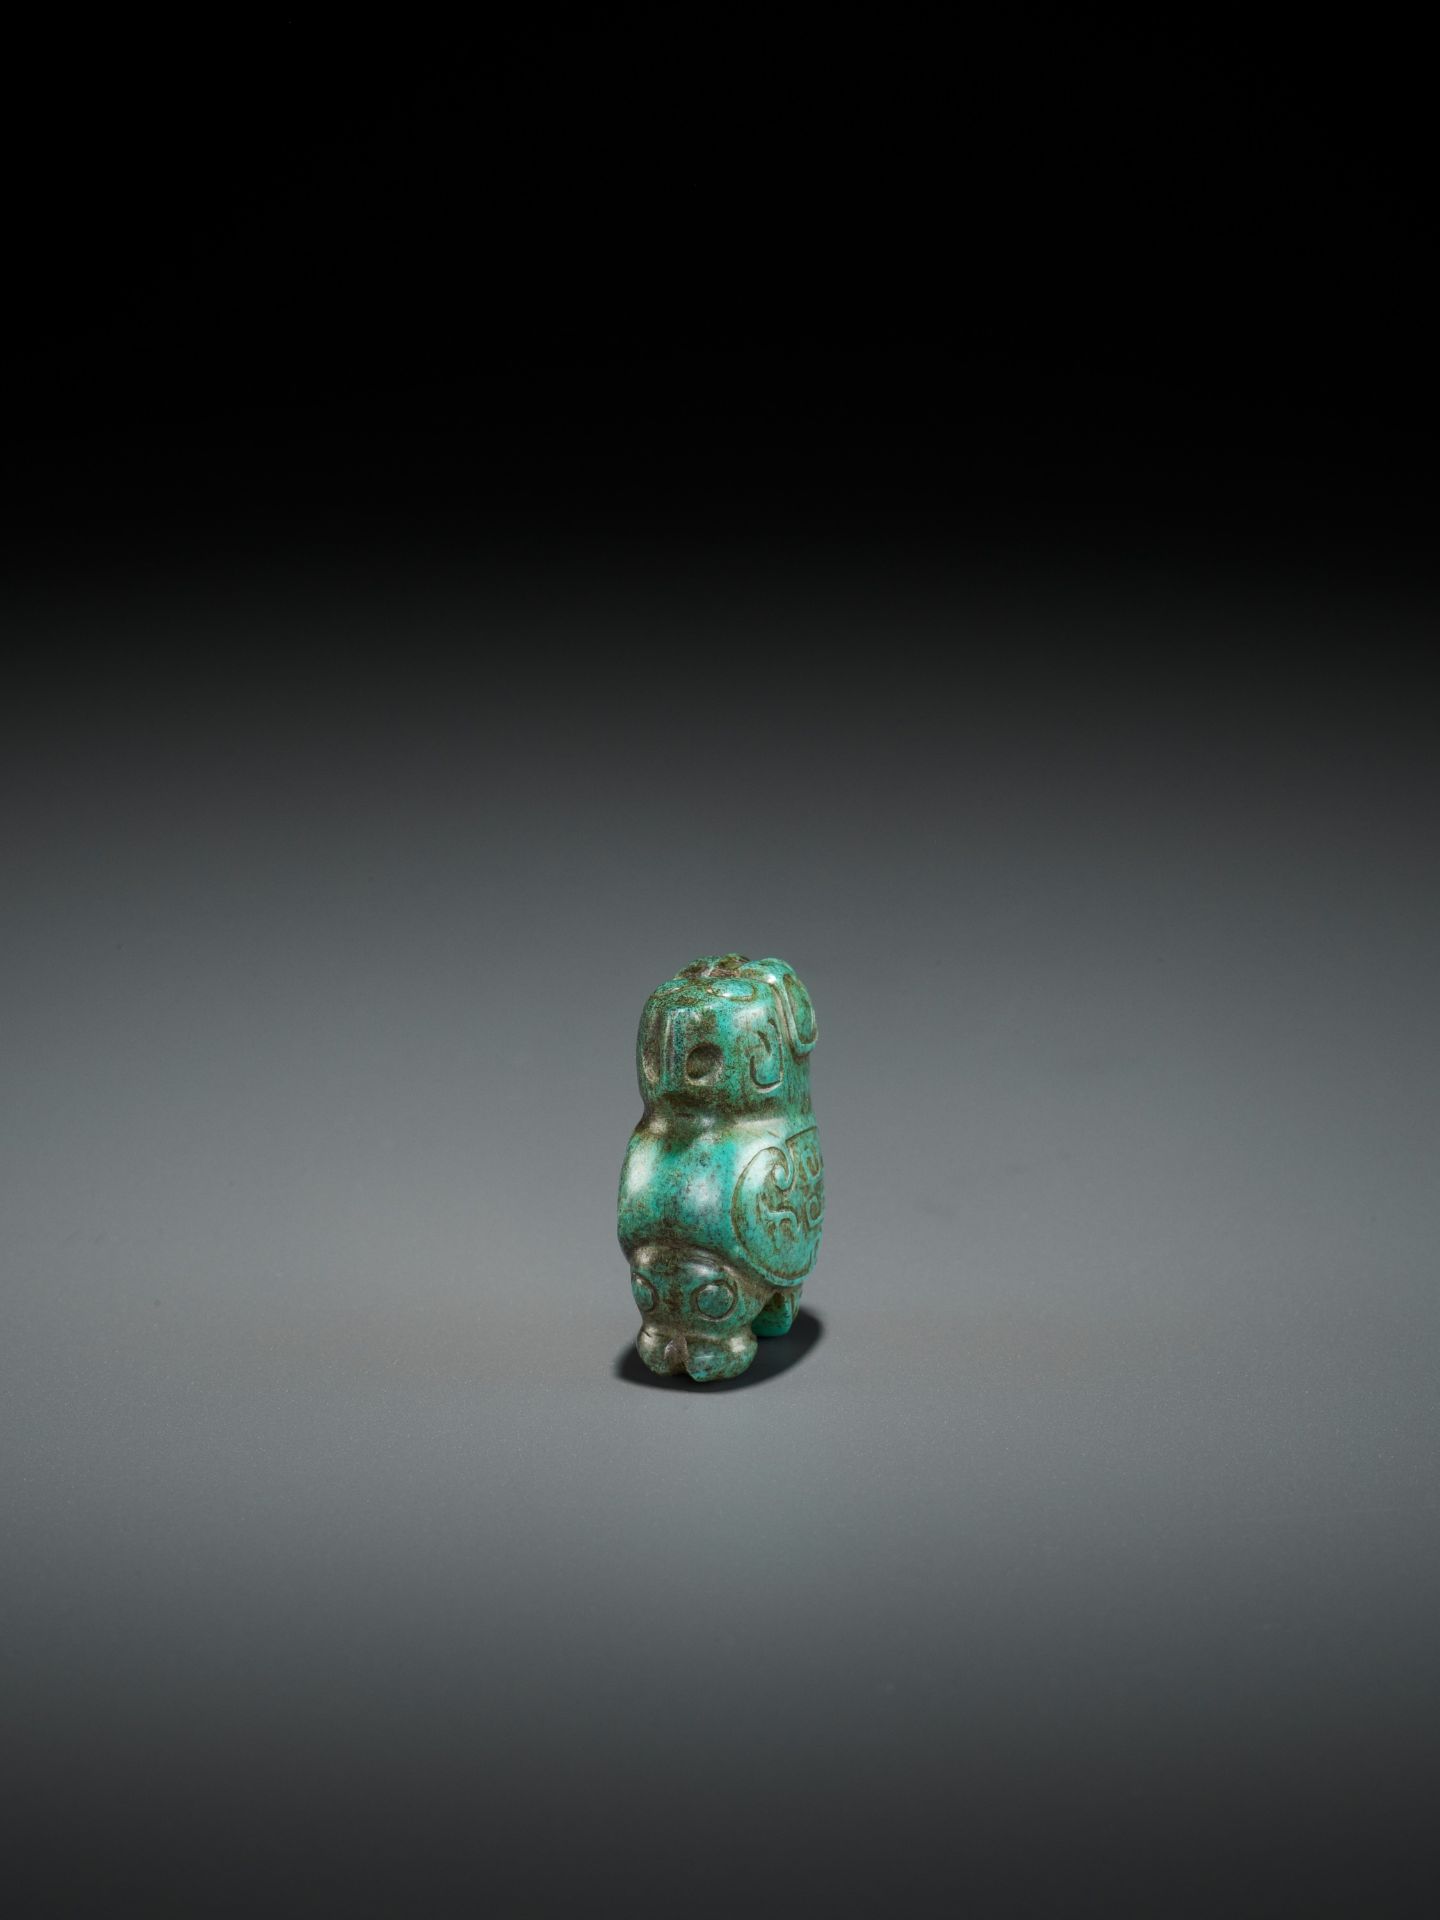 A TURQUOISE MATRIX PENDANT DEPICTING AN OWL, LATE SHANG DYNASTY - Image 10 of 13